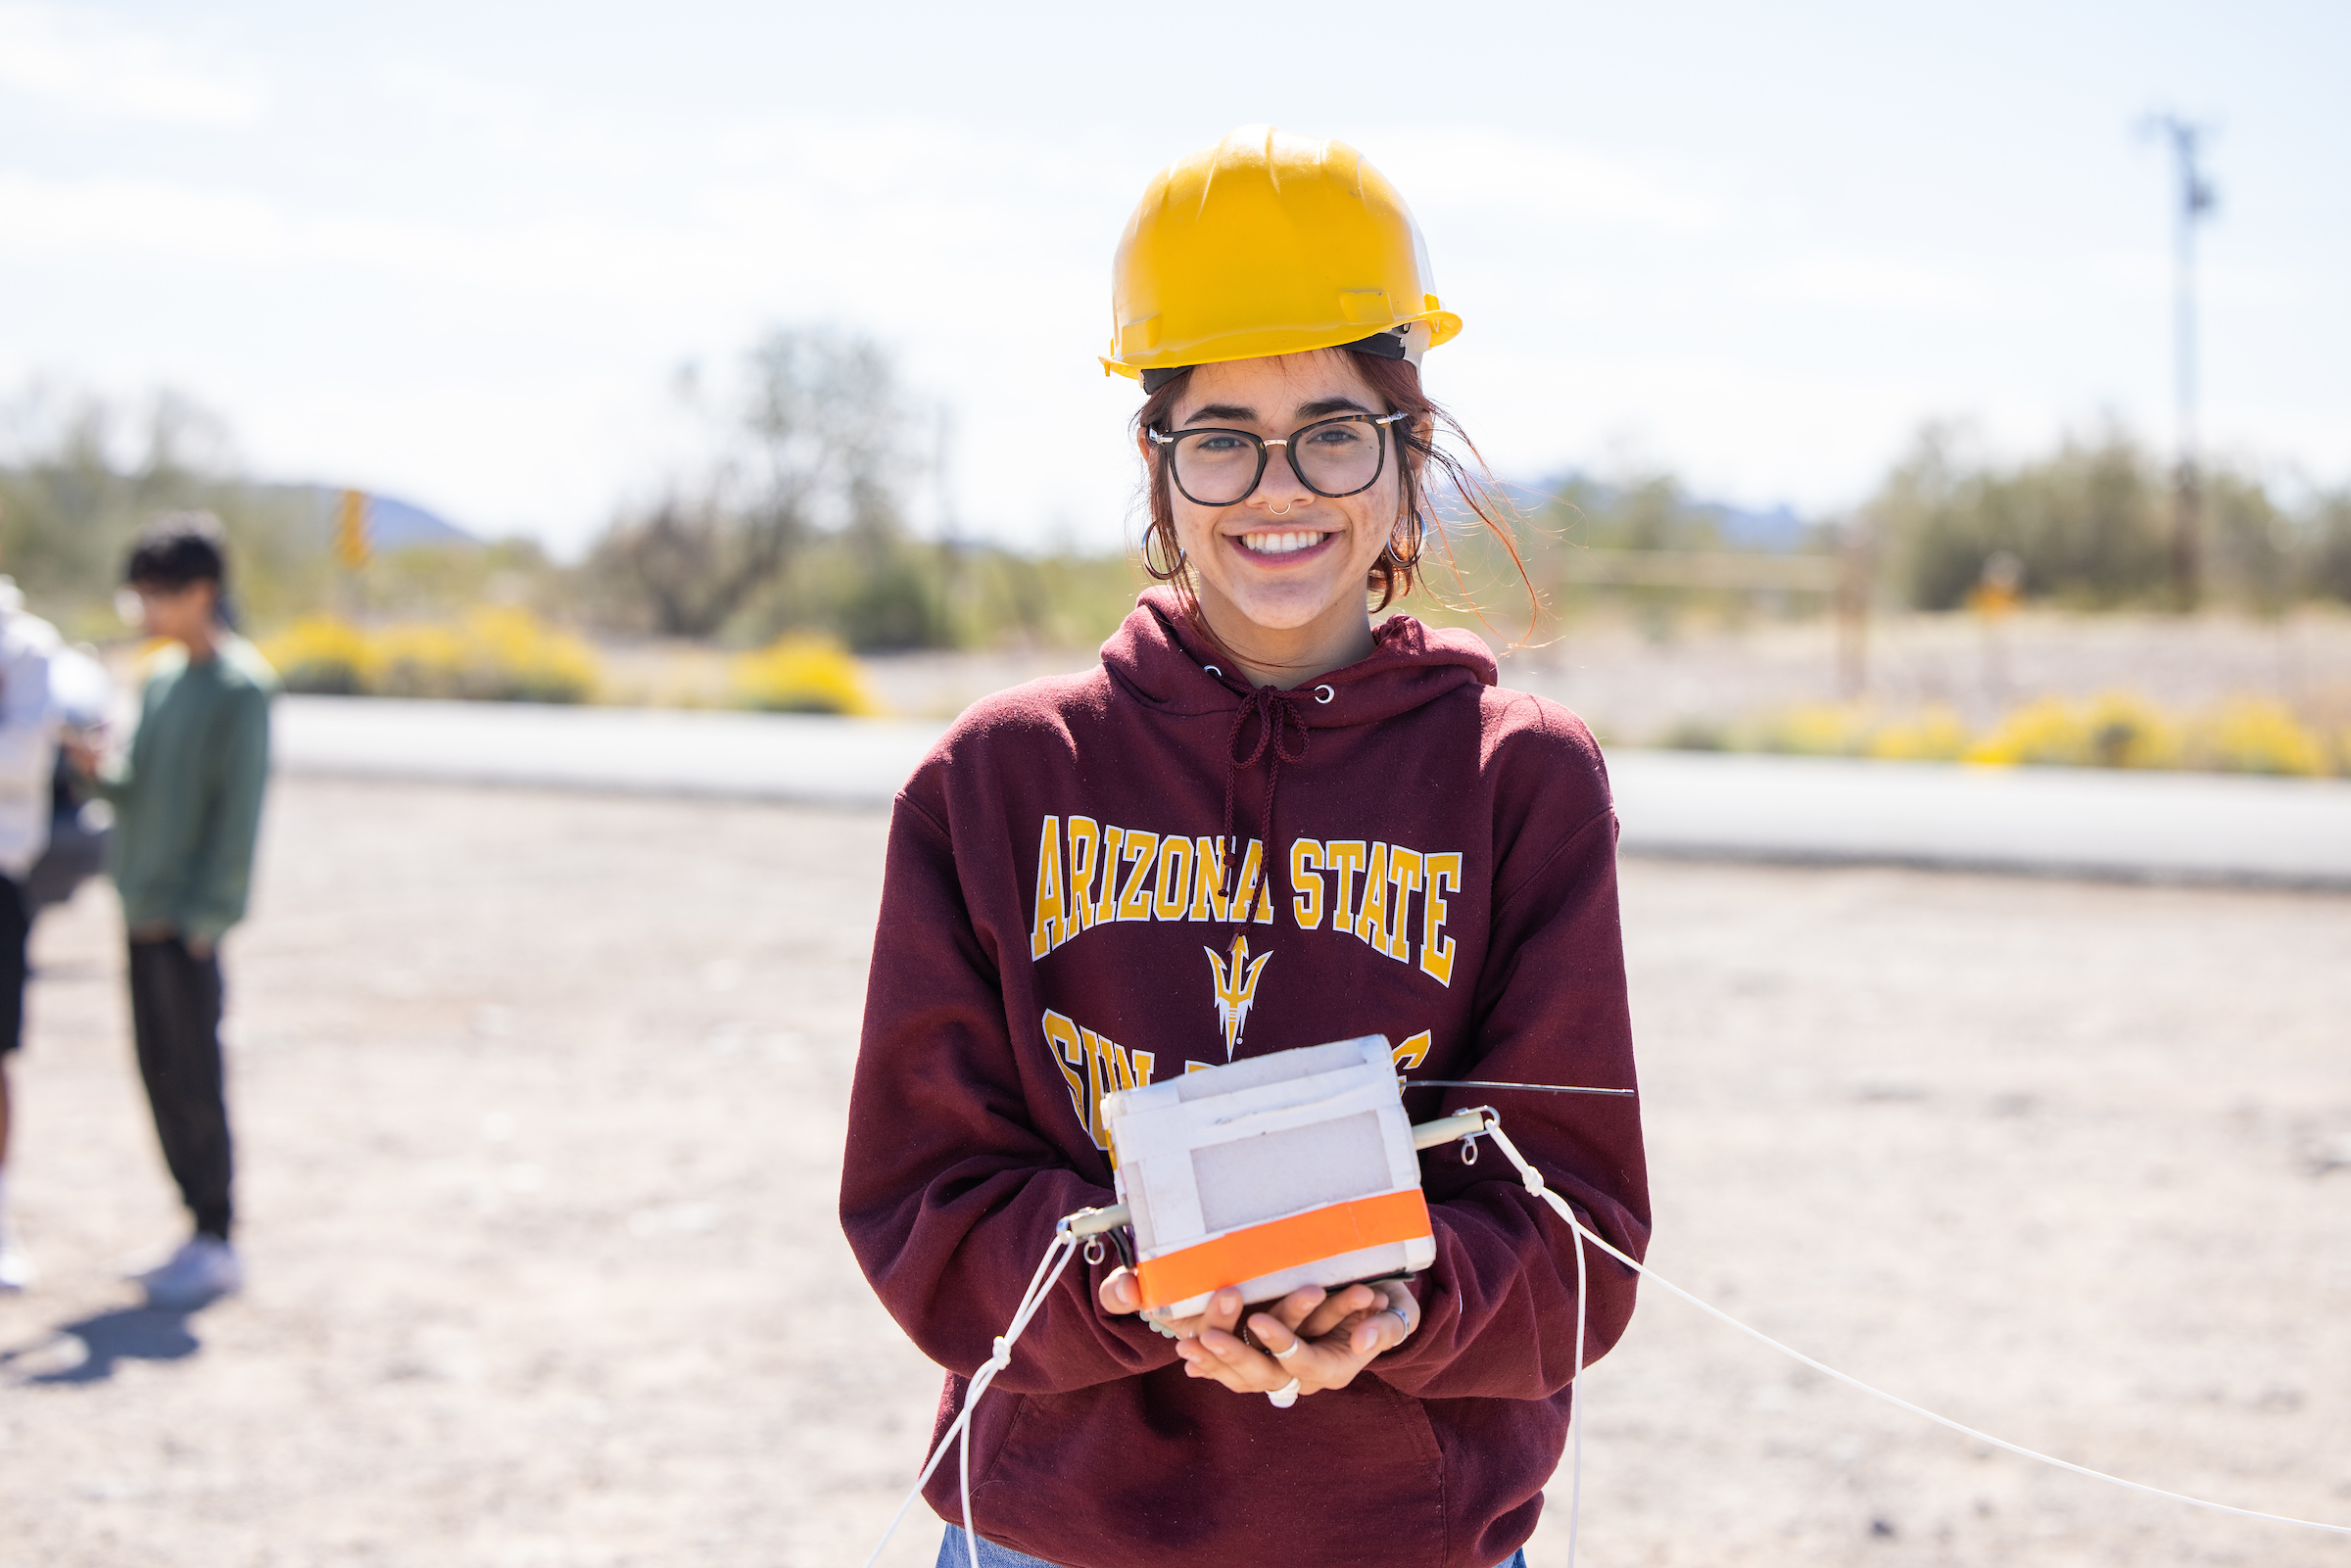 Student wearing hard hat and ASU sweatshirt holds a weather balloon payload